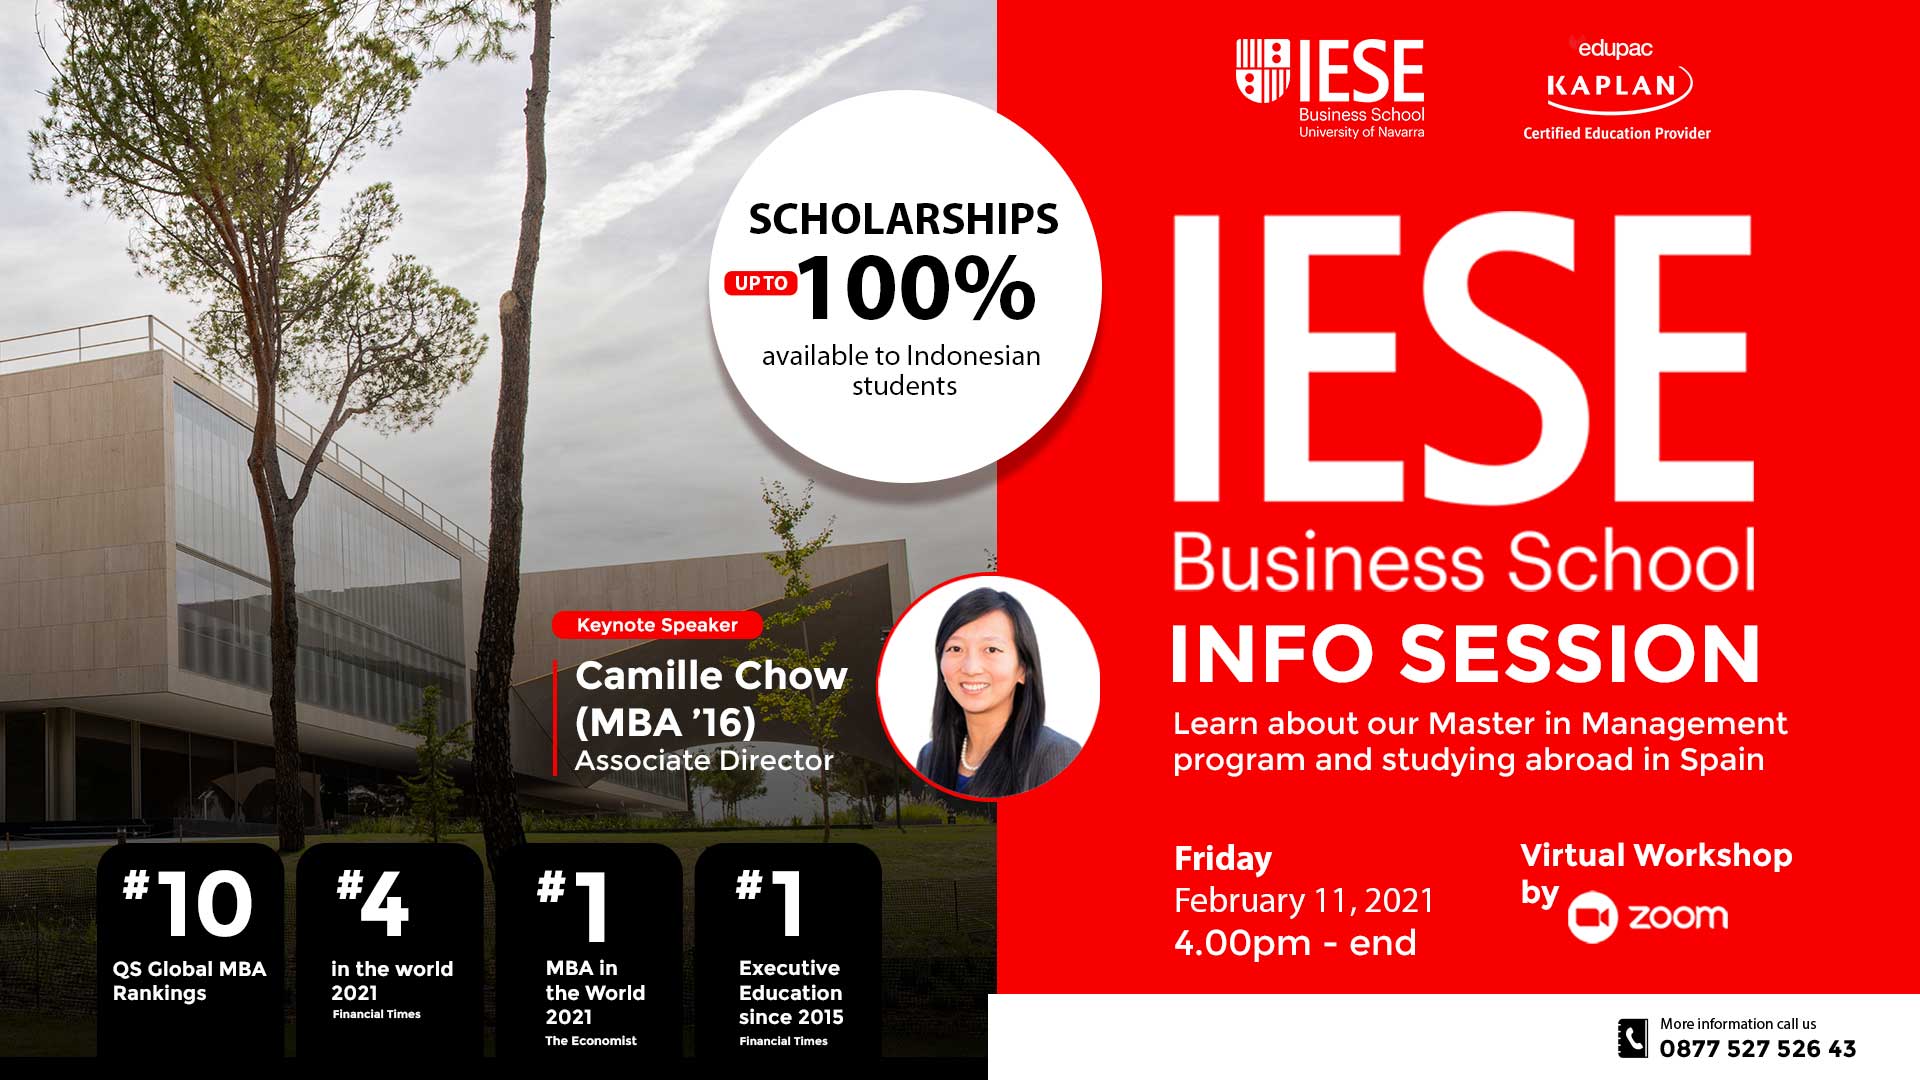 Webinar: "IESE Business School Info Session - Learn about our Master in Management program, studying abroad in Spain and scholarships" 